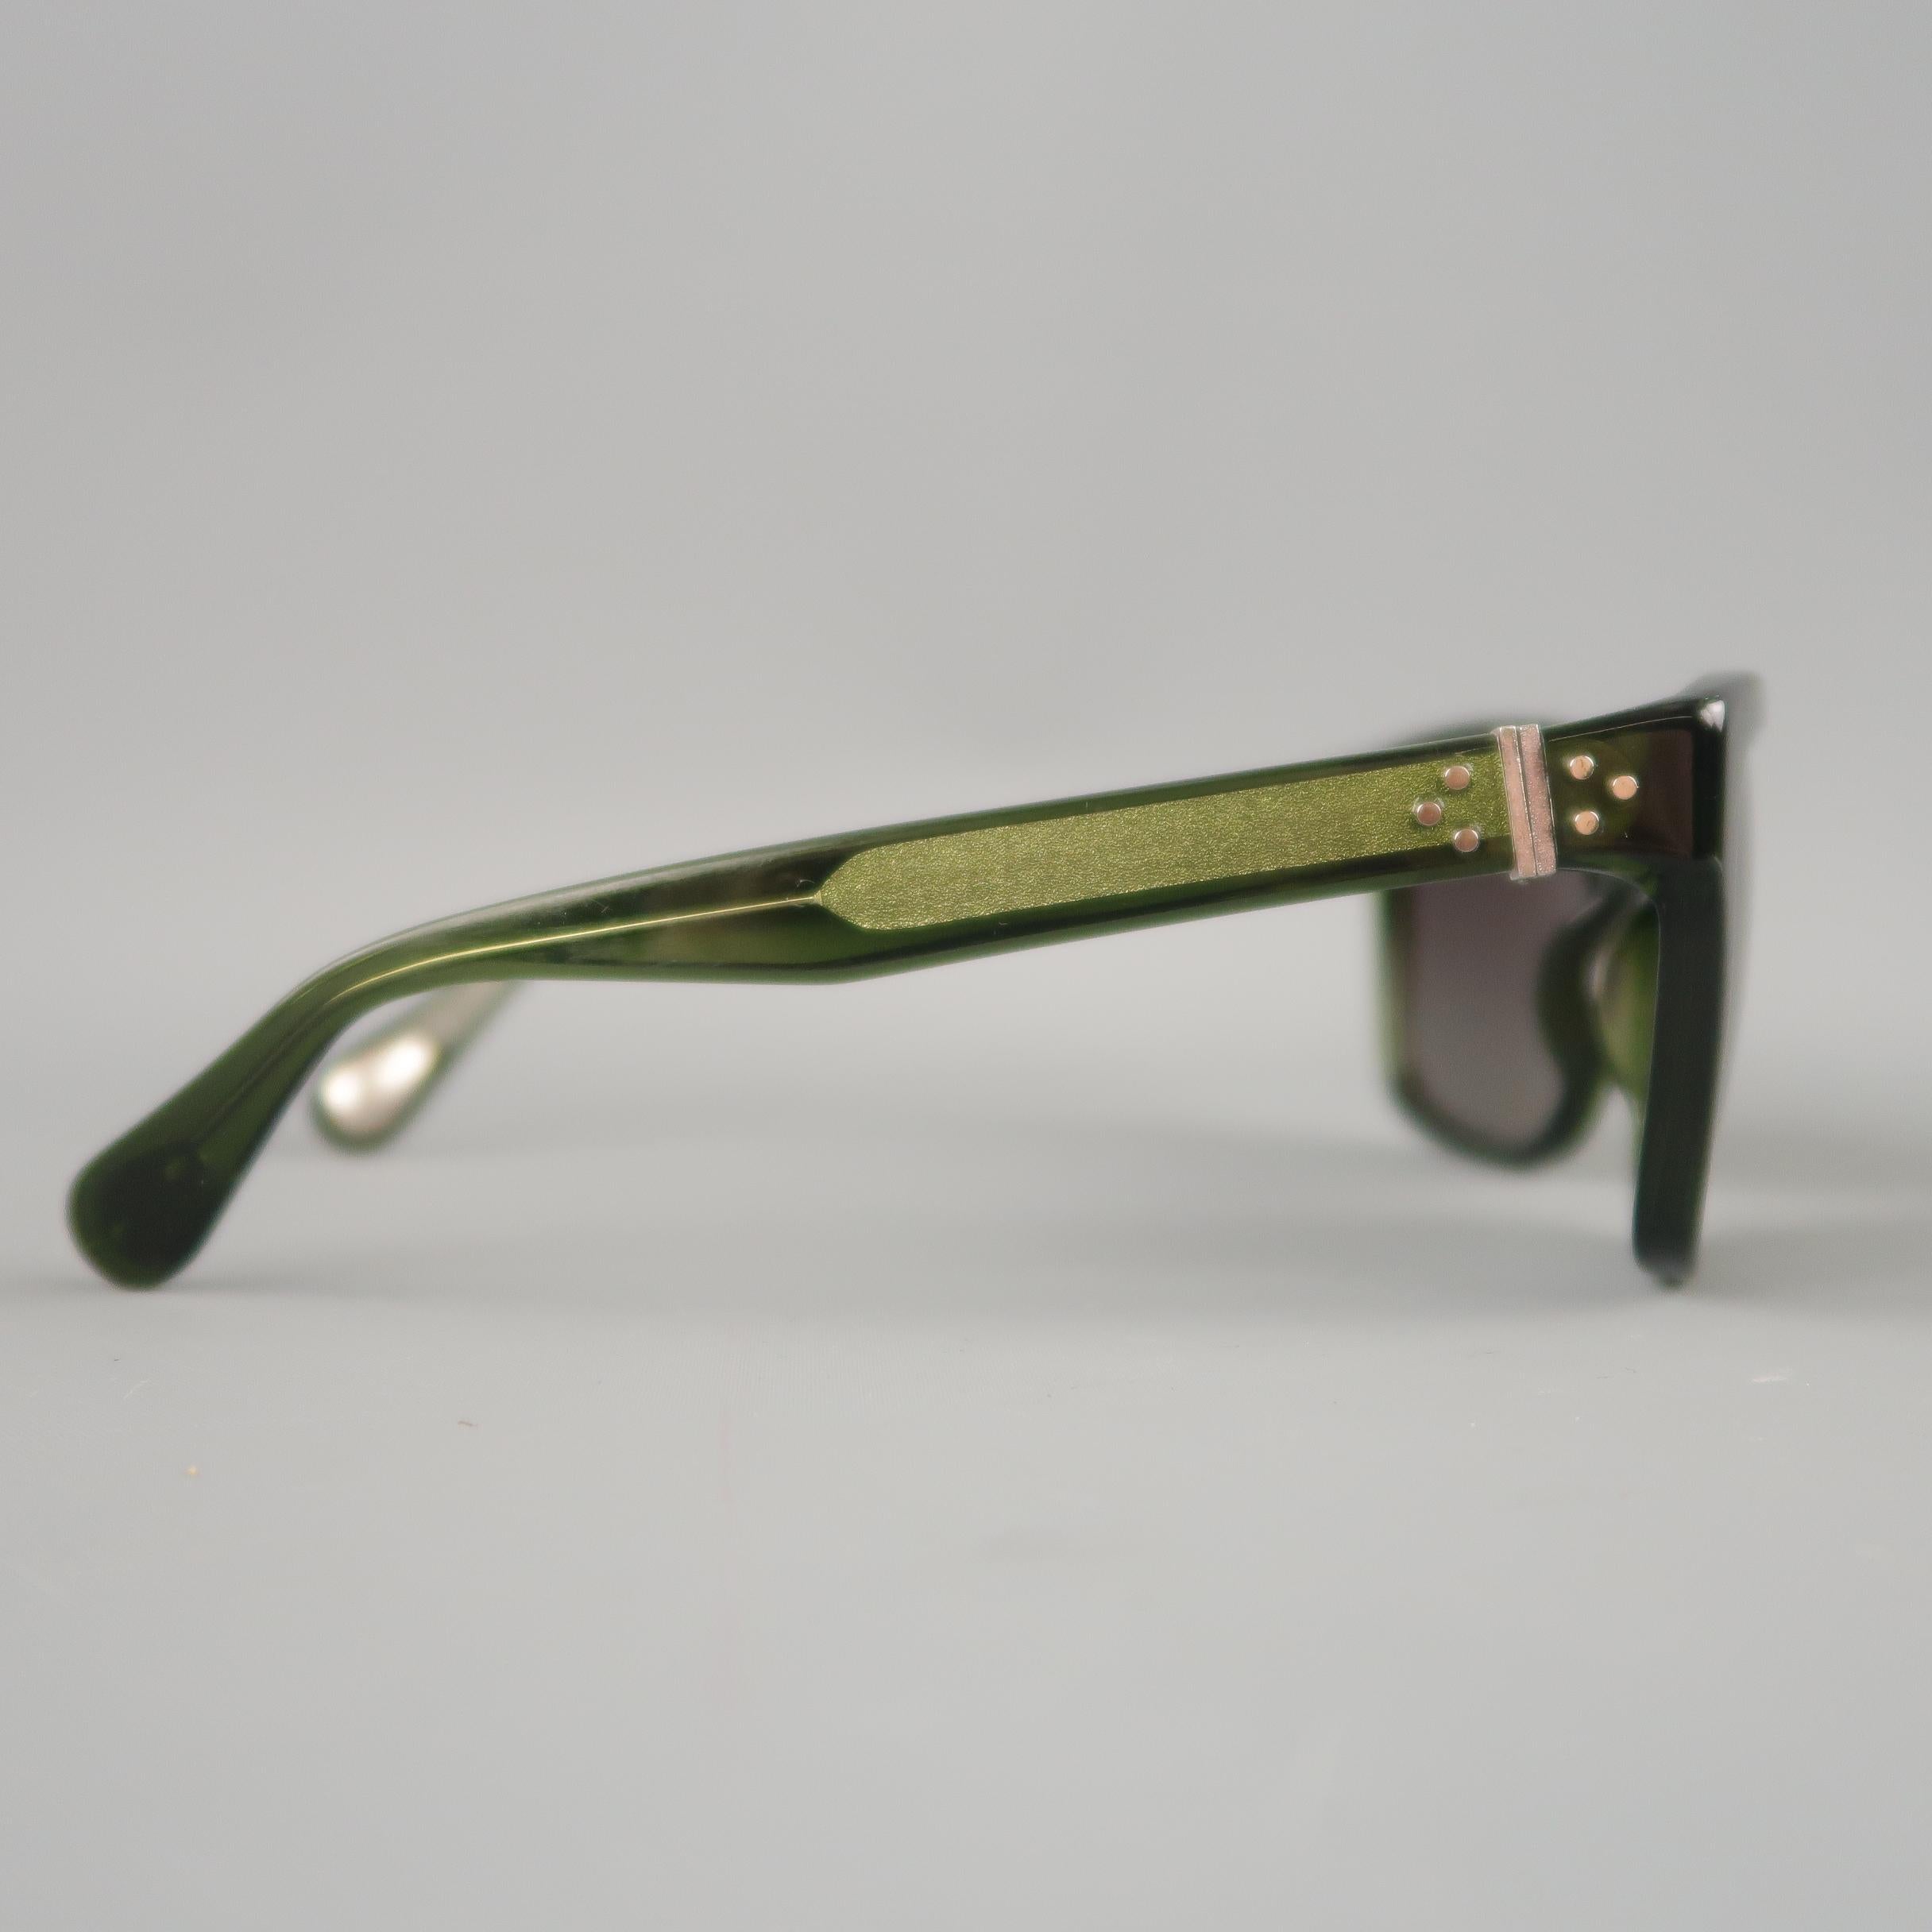 ANN DEMEULEMEESTER D Frame sunglasses come in clear green acetate with Sterling Silver accents and square black lenses. With Case & Box. Made in Italy.
 
Excellent Pre-Owned Condition. Retails: $700.00.
Marked:
 
Measurements:
 
Length: 14 